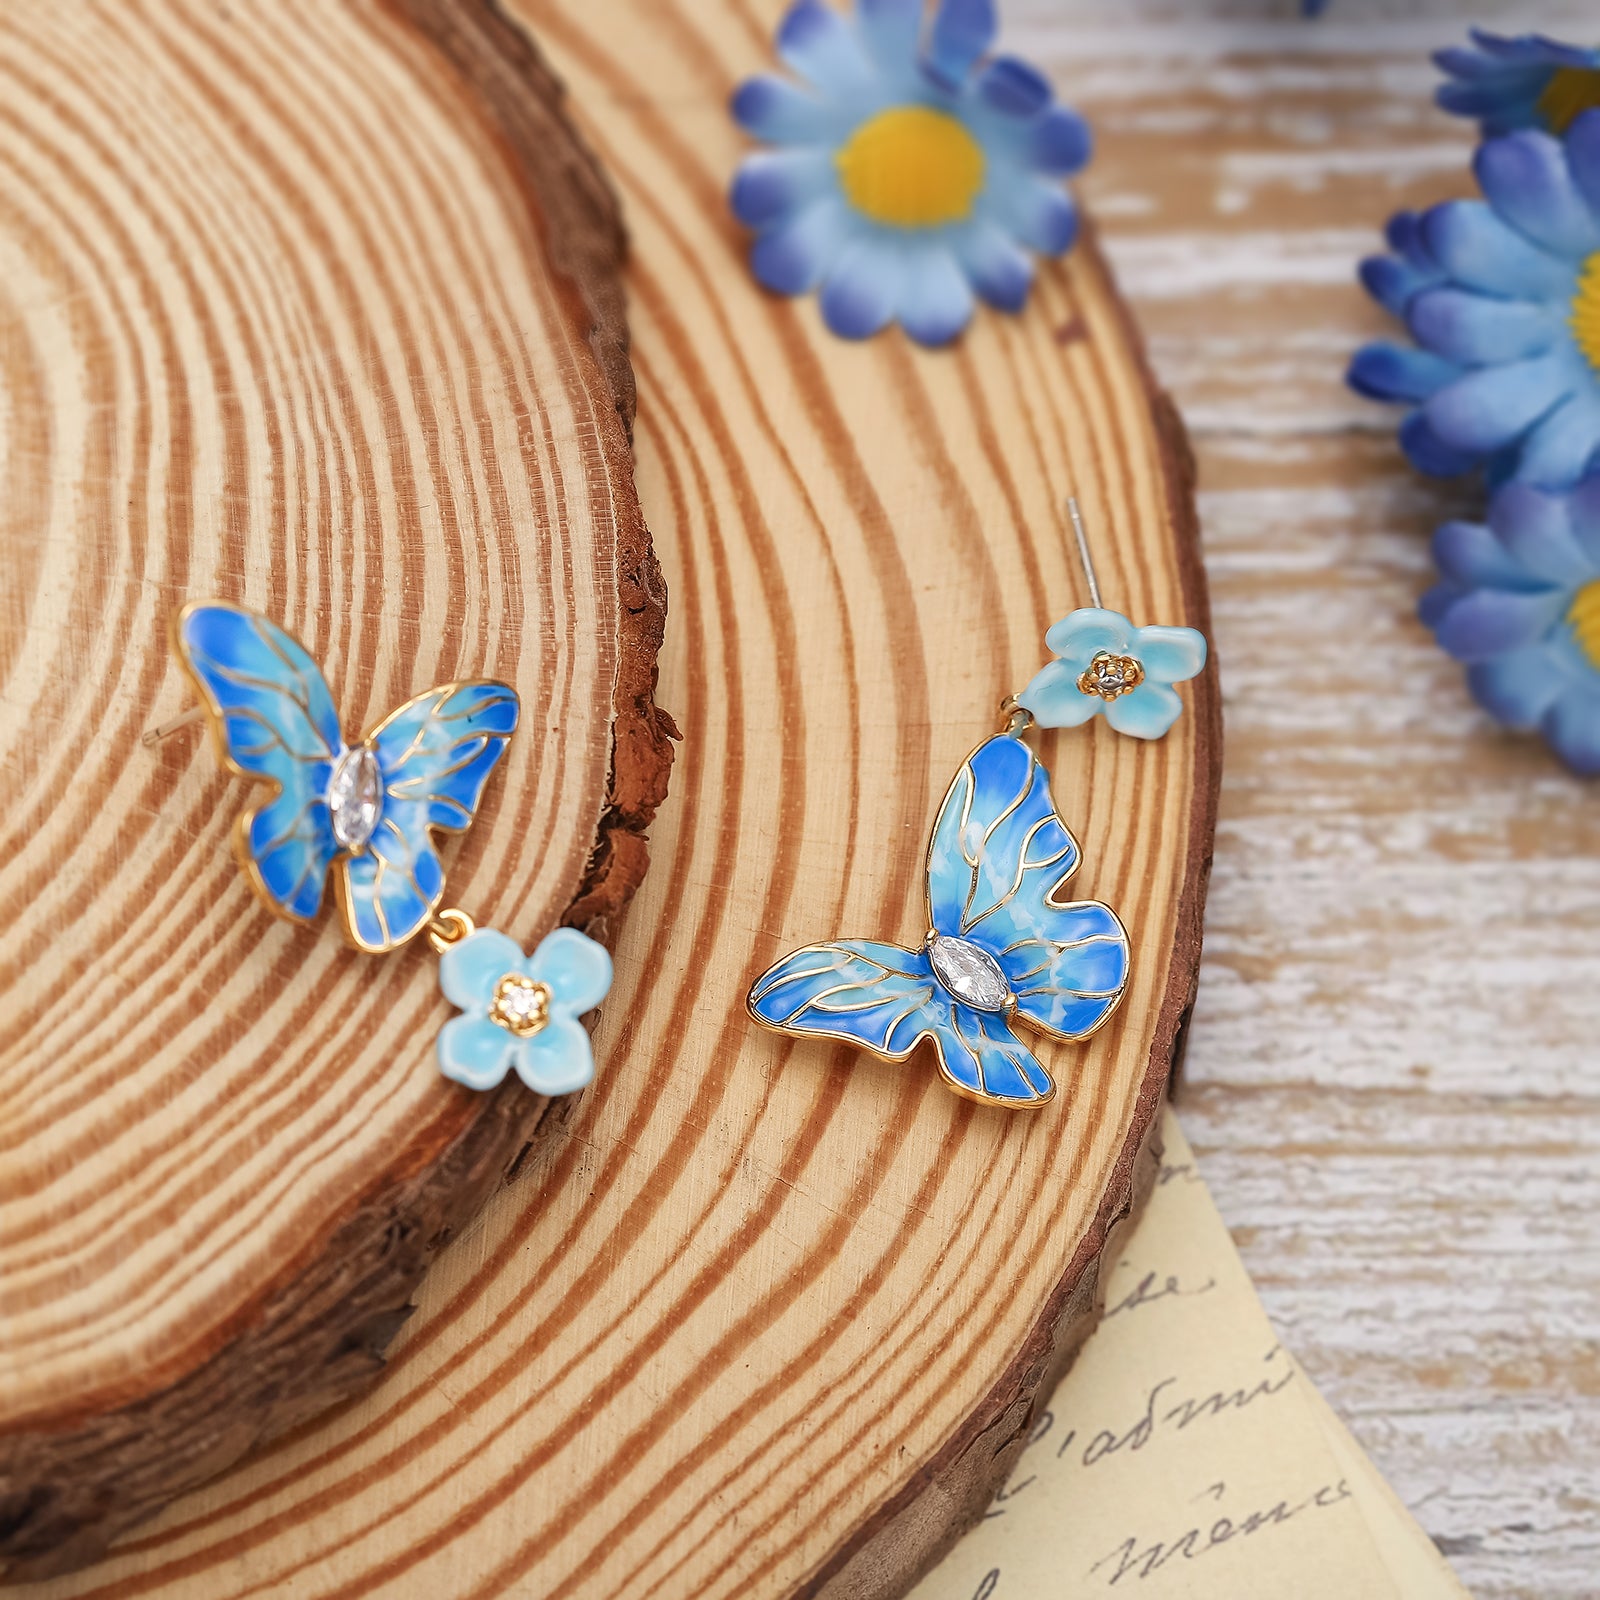 Blue Morpho Butterfly 18k Gold Earrings Gift Set with Gift Wrapping